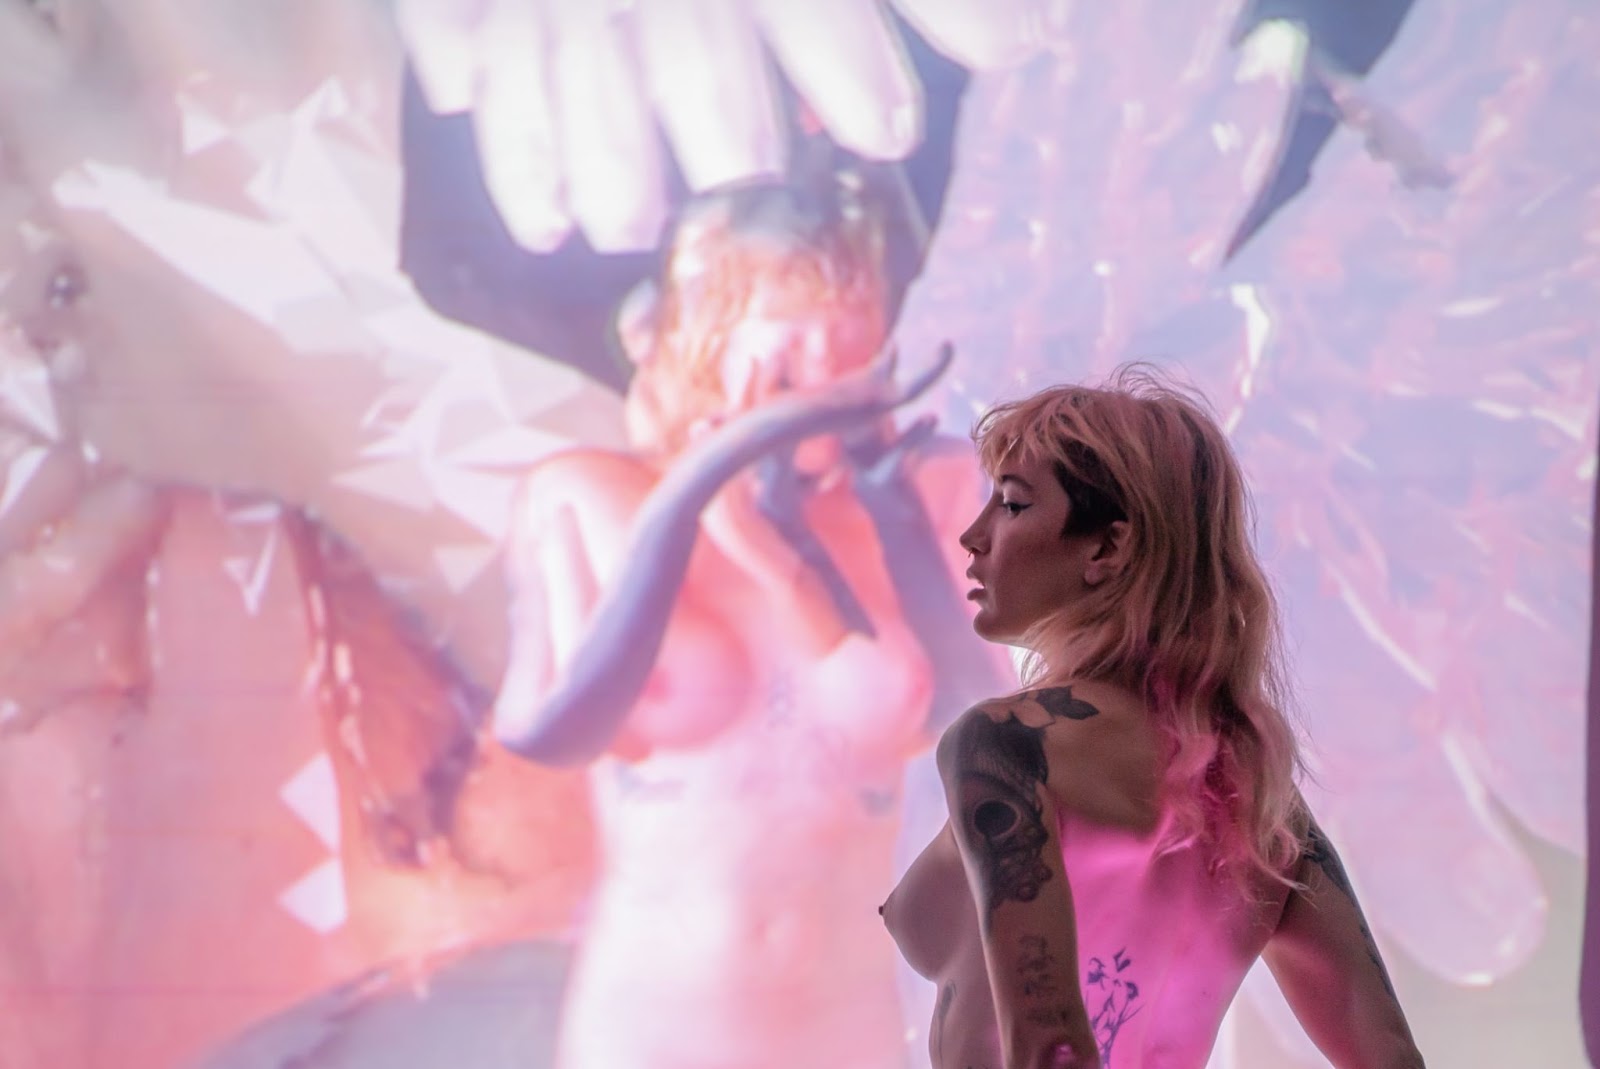 Image: Ava Wanbli performs “Sertraline Dolls'' at Elastic Arts for the Elastro A/V Festival. A 3-D model of a nude trans girl with white wings is projected onto the wall. Ava is standing half-profile and nude with her back to the camera. Her back is illuminated by a pink light. Photo by Mikey Mosher.